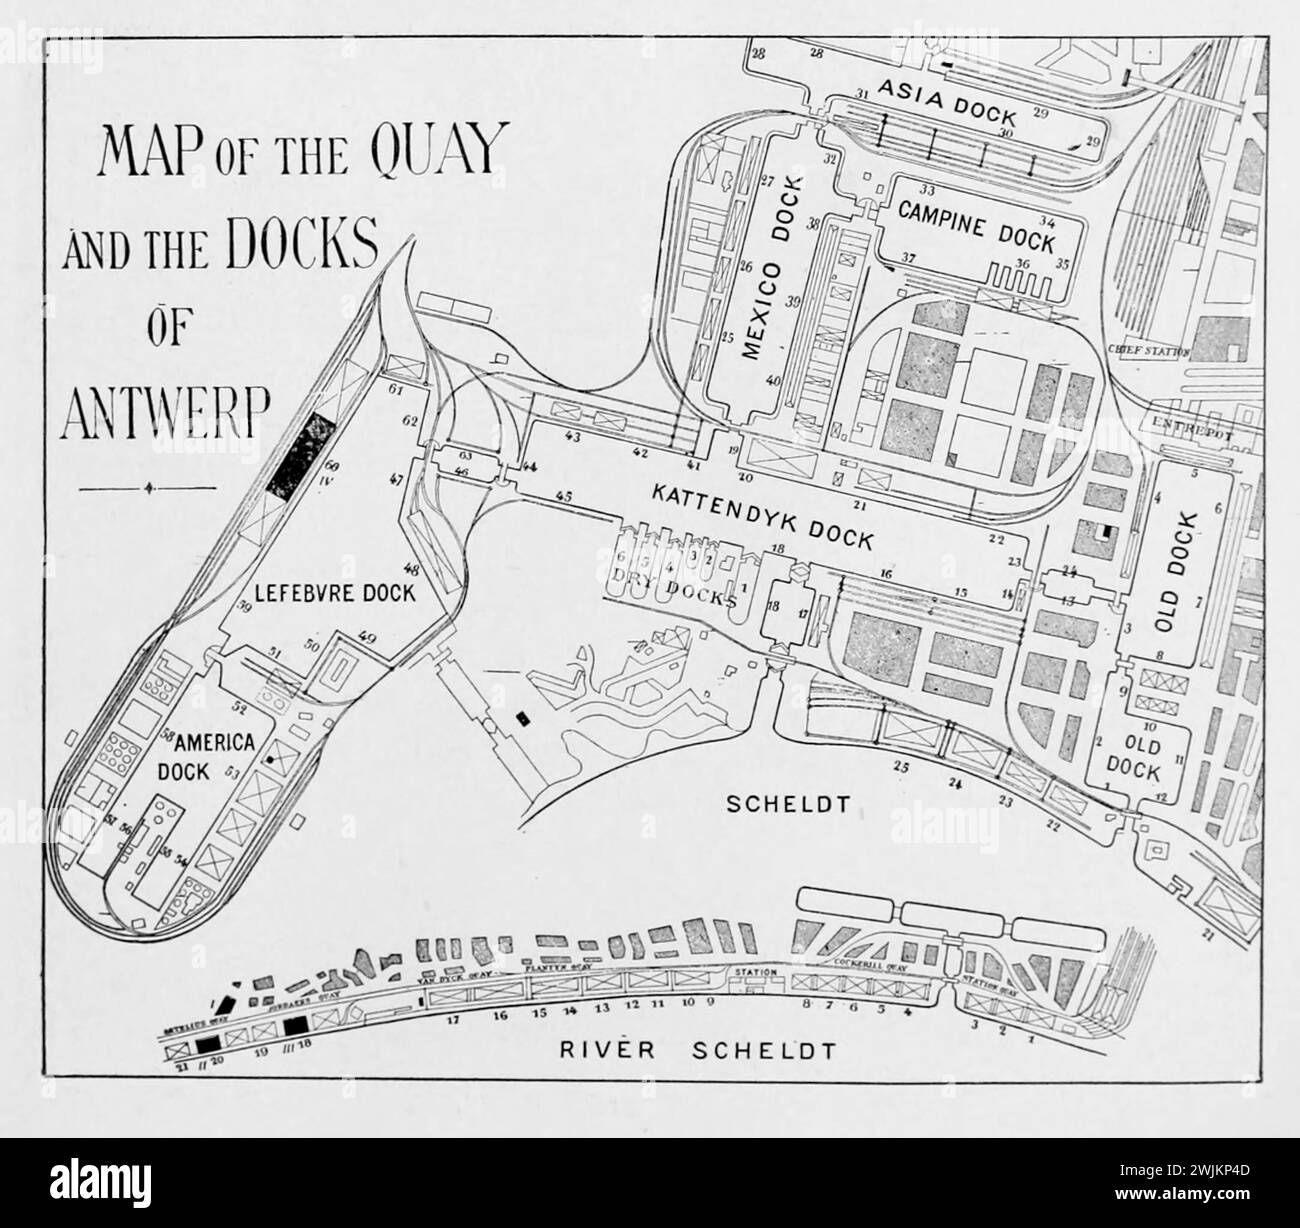 Map of the Quays and the Docks of Antwerp, Belgium from the Article MODERN WHARF IMPROVEMENTS AND HARBOR FACILITIES. By Foster Crowell. from The Engineering Magazine Devoted to Industrial Progress Volume XIV October 1897 - March 1898 The Engineering Magazine Co Stock Photo